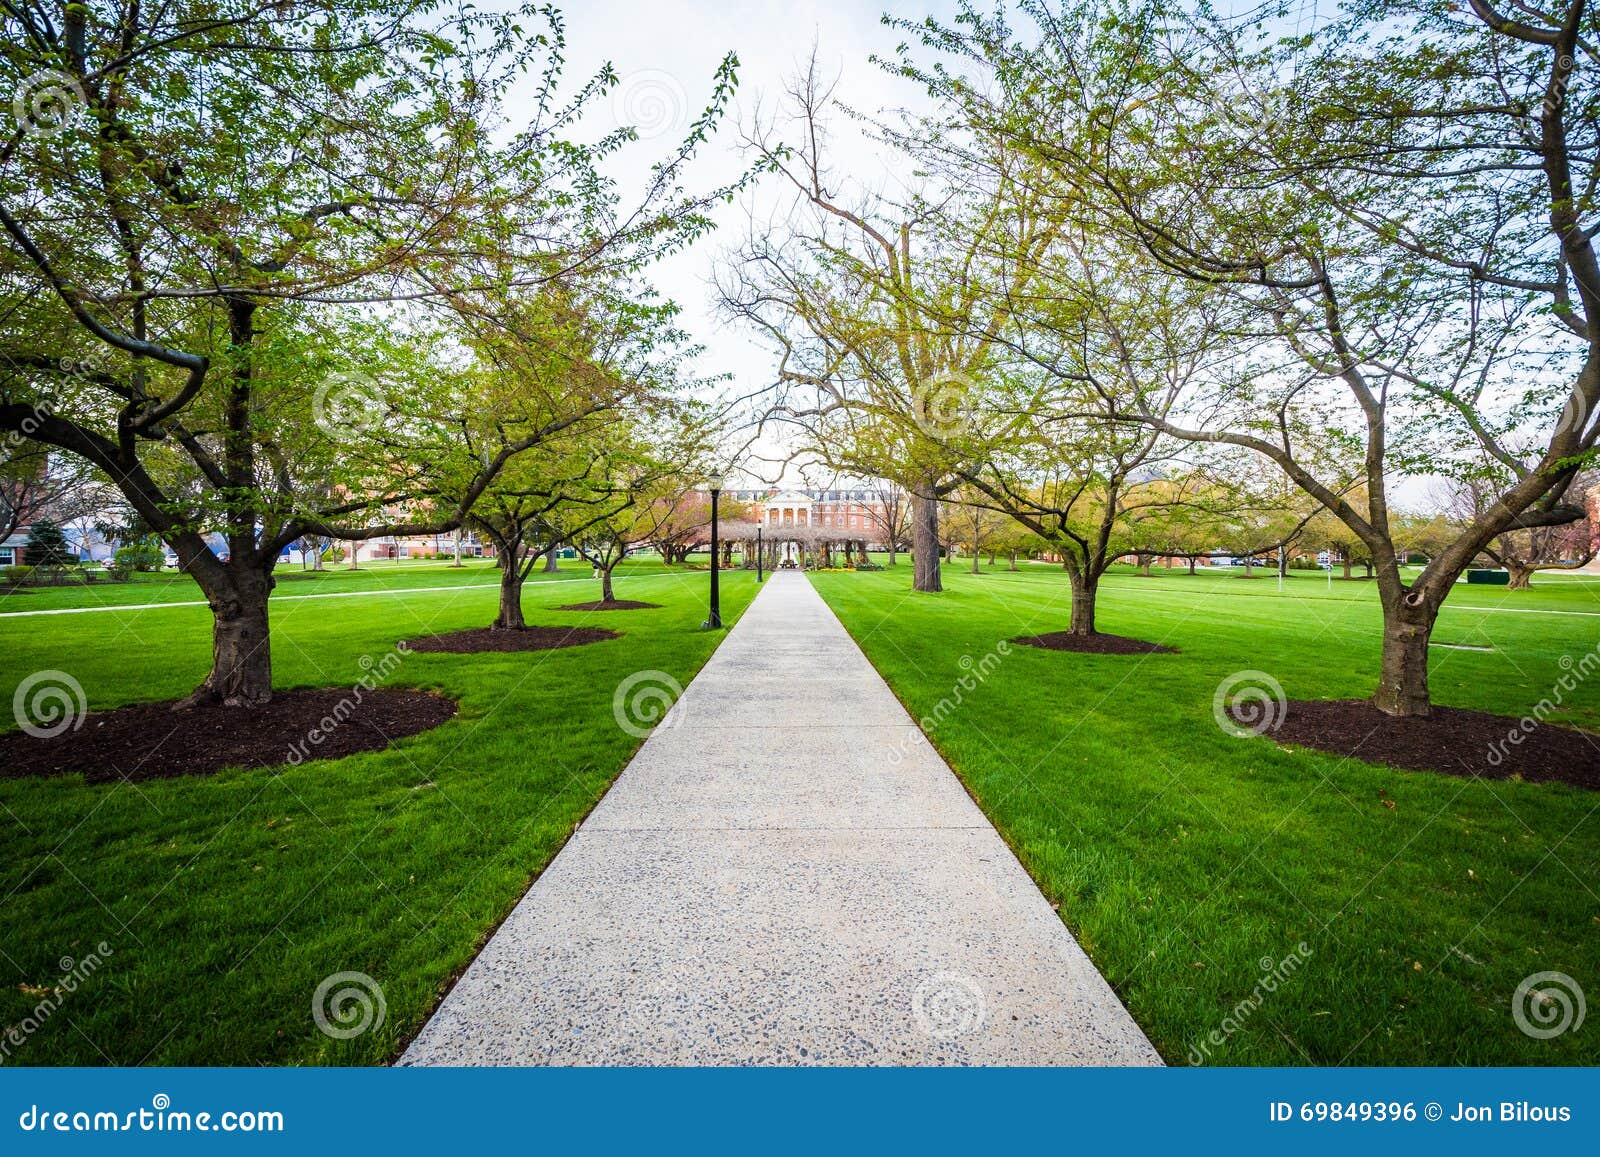 trees along a walkway at hood college, in frederick, maryland.